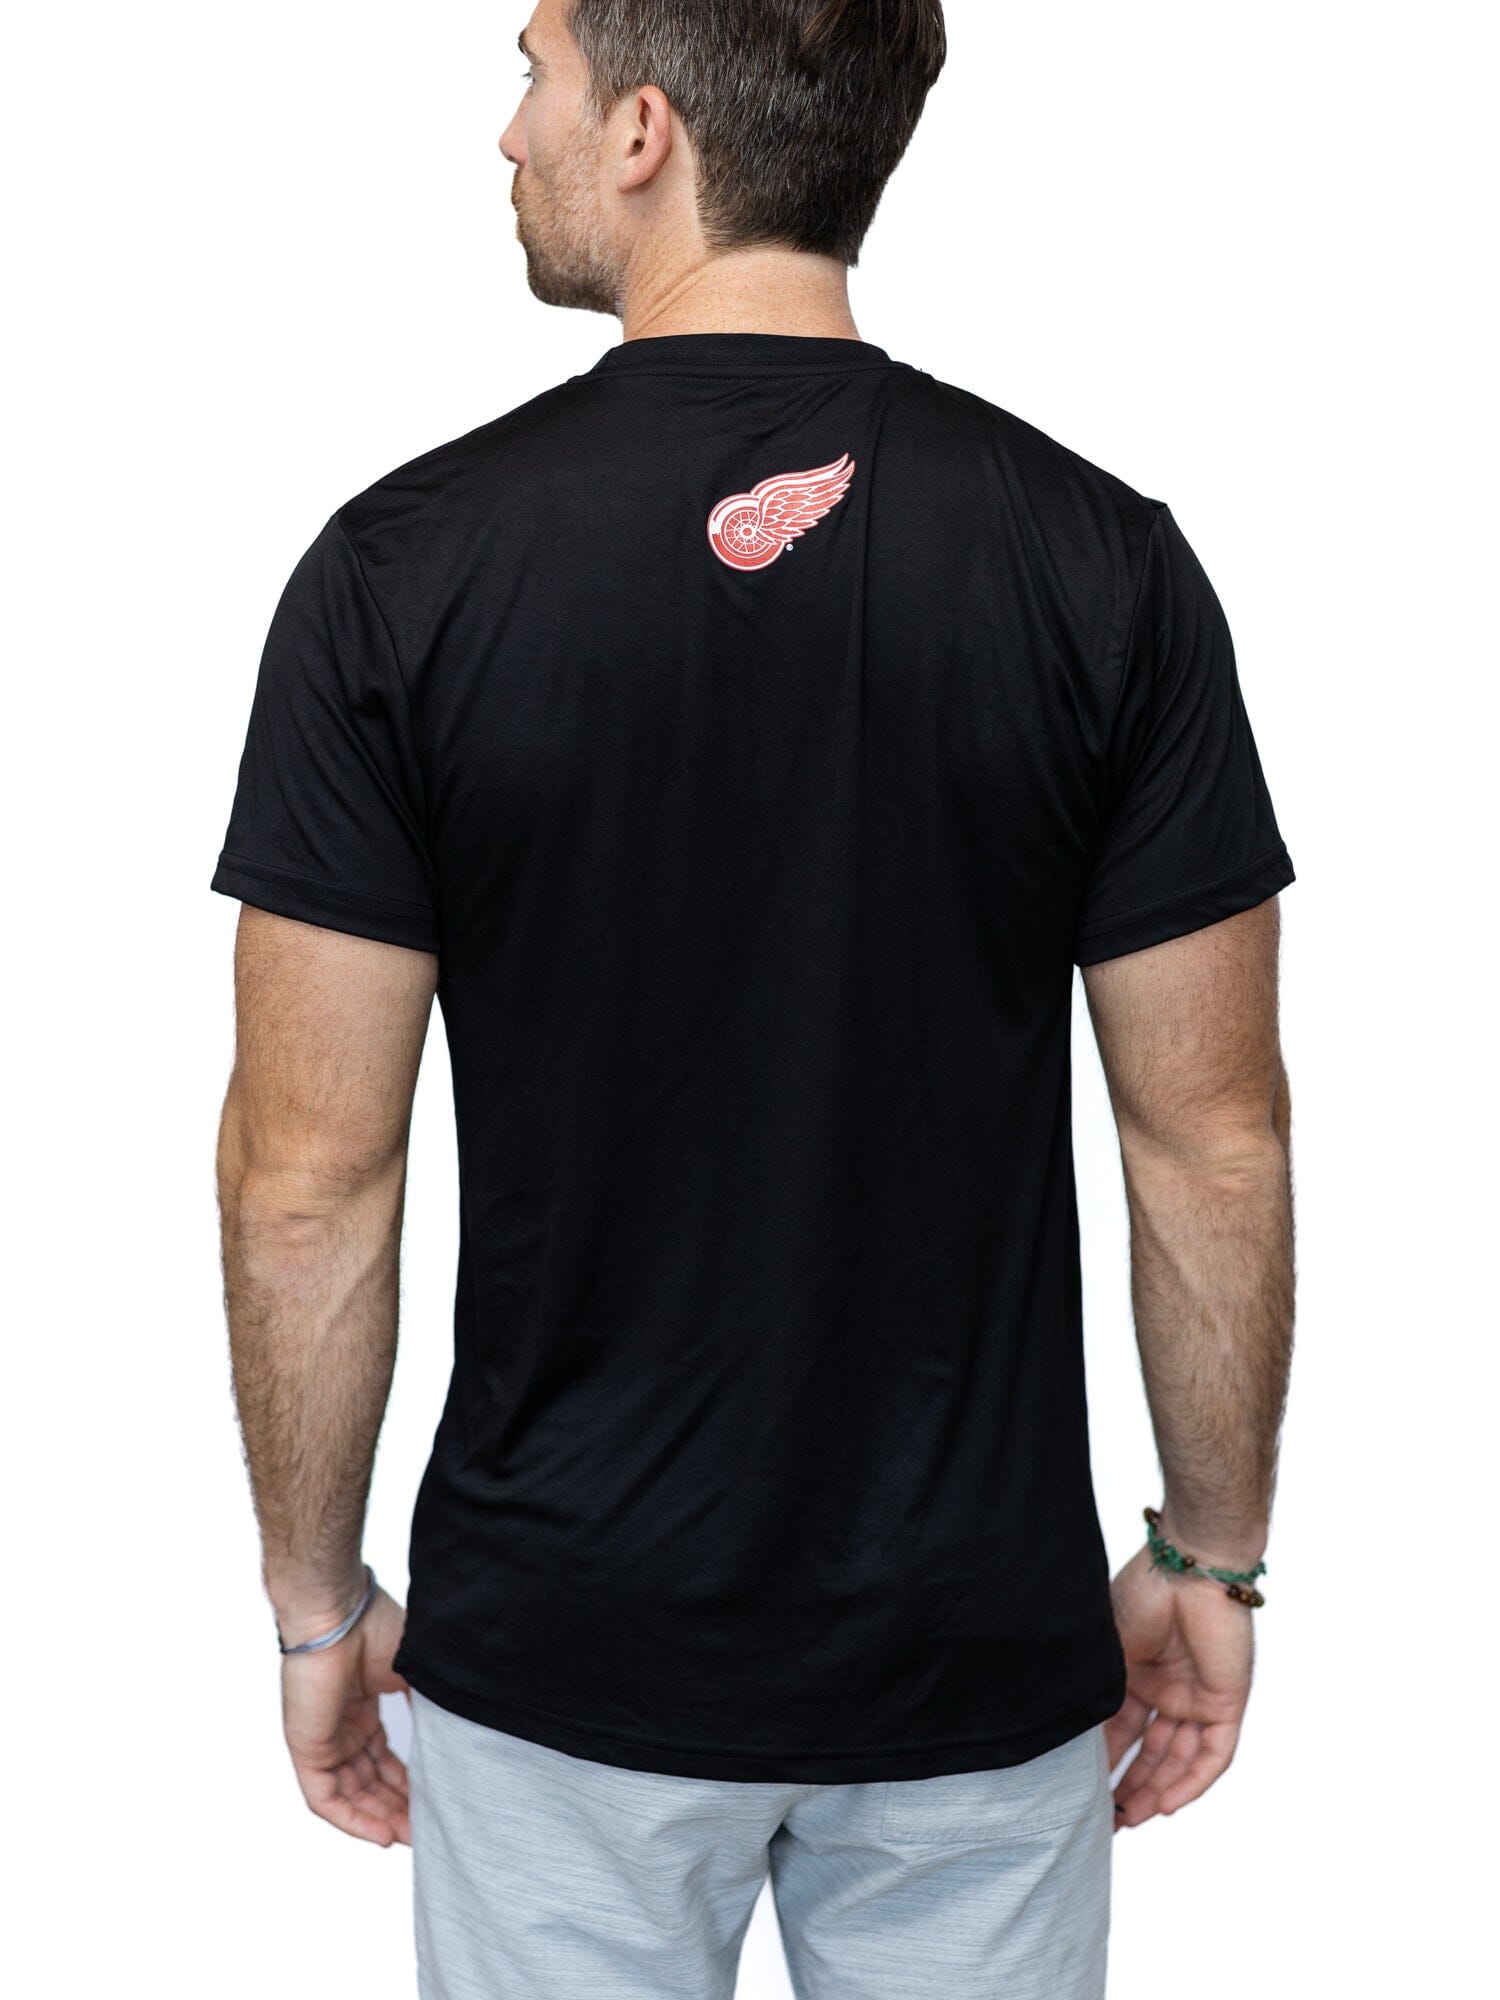 Best Dad Ever Detroit Red Wings t-shirt by To-Tee Clothing - Issuu